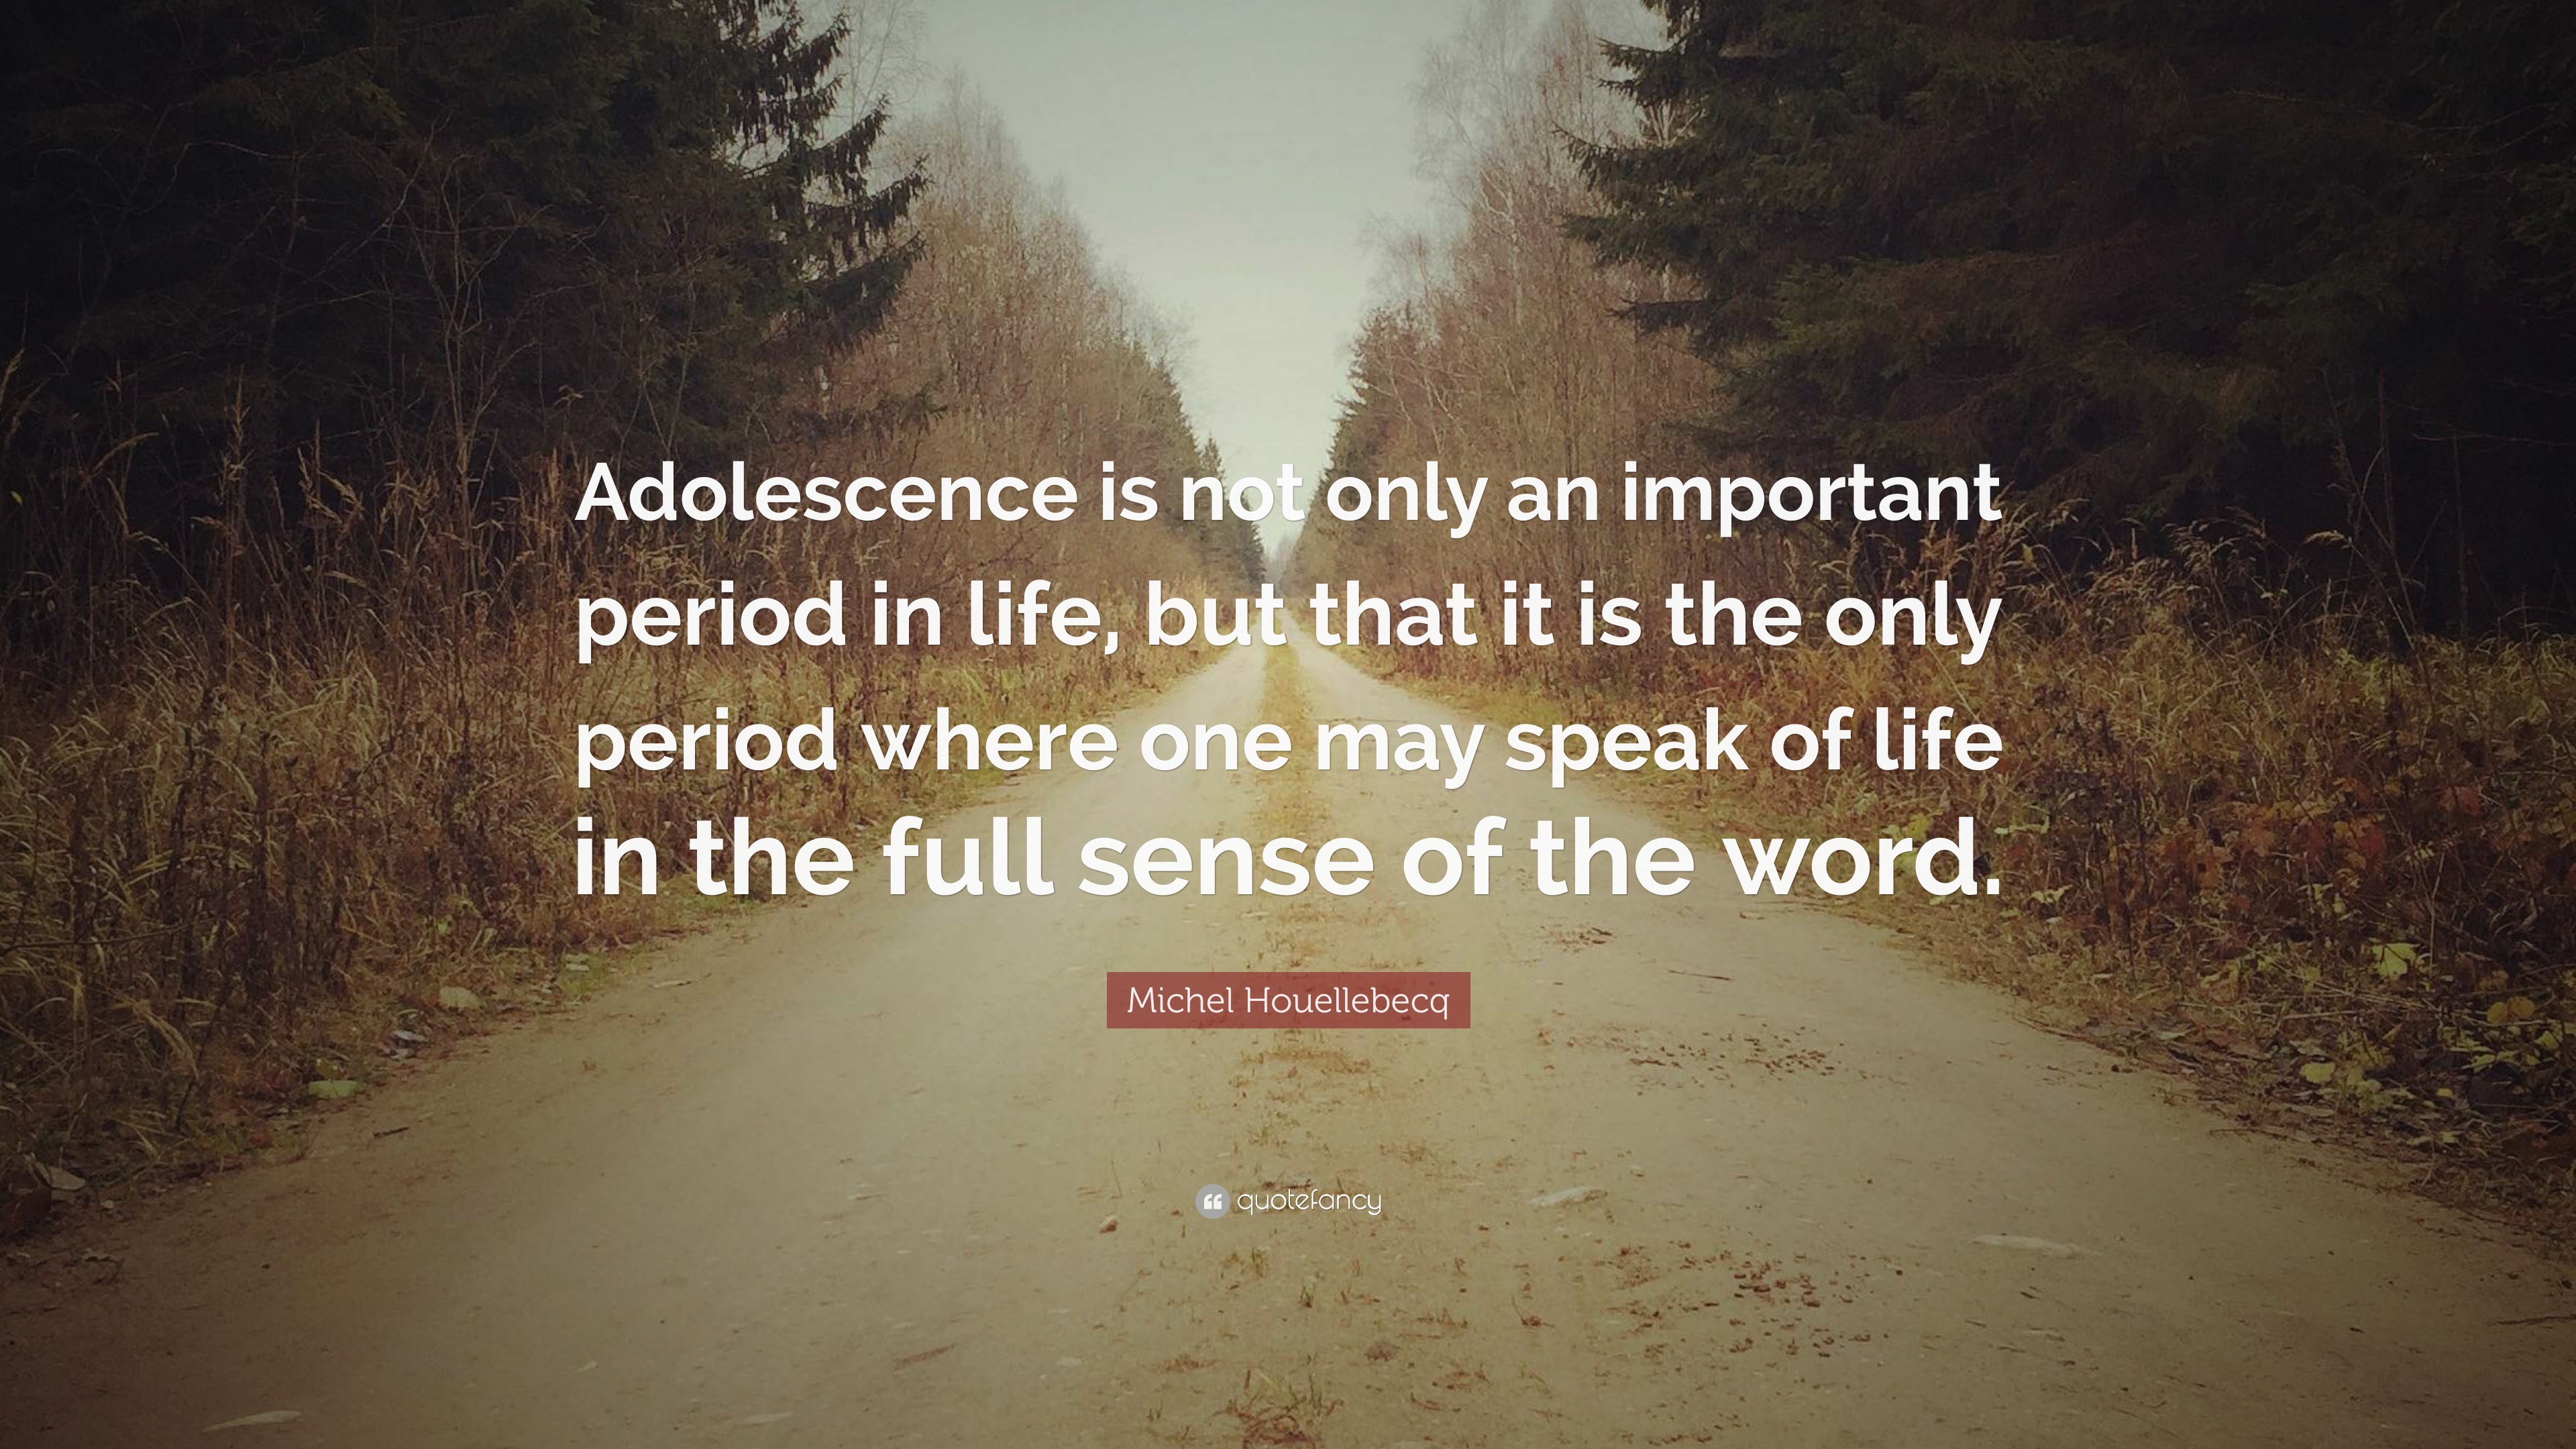 Michel Houellebecq Quote: “Adolescence is not only an important